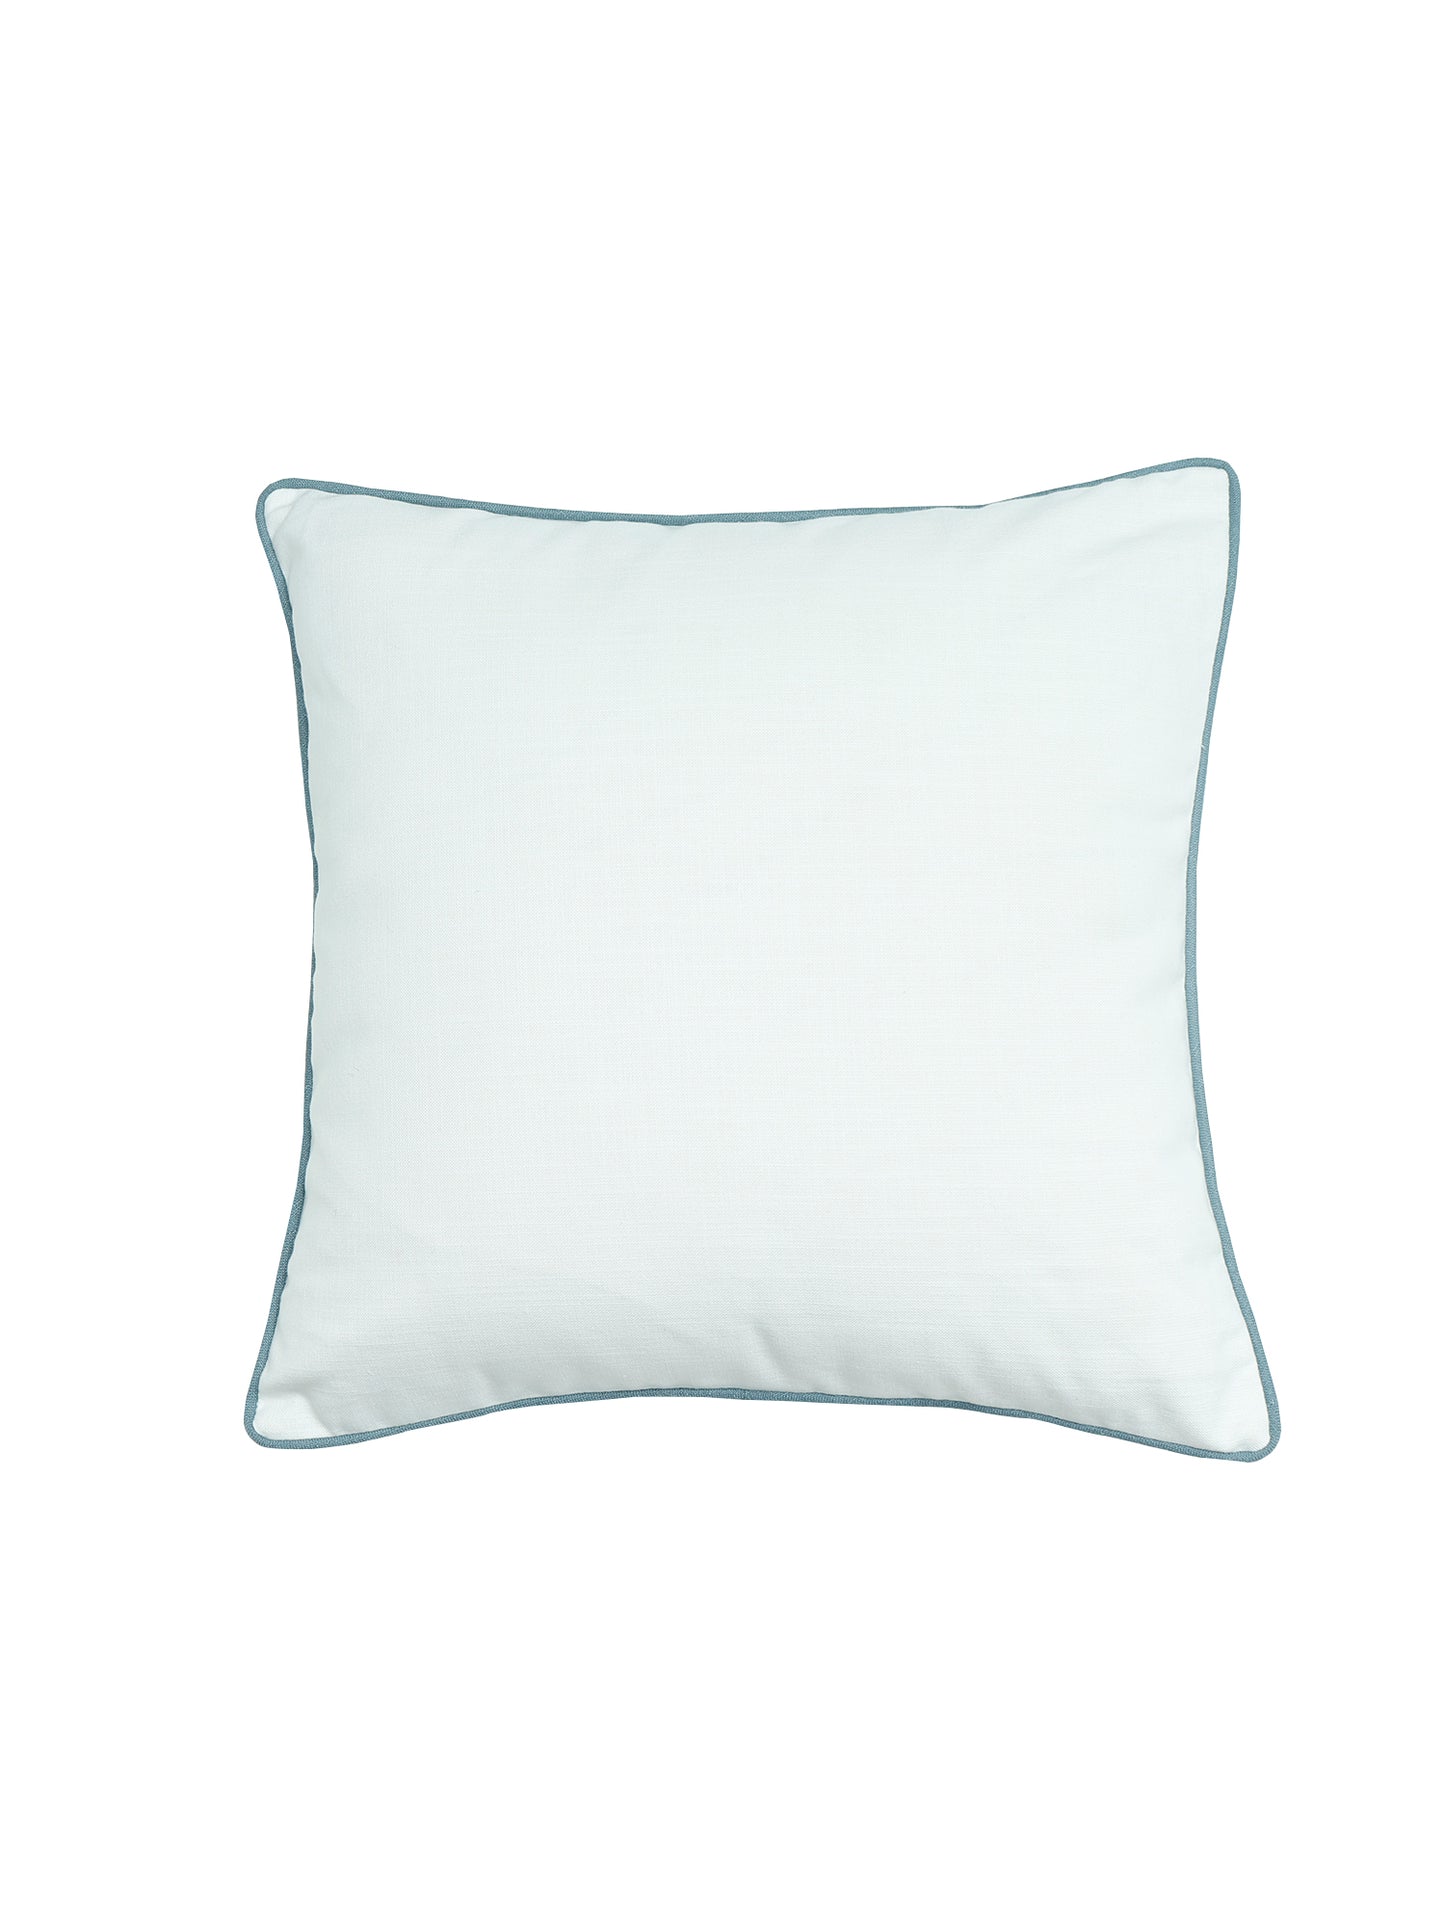 Cushion Cover Cotton Blend Solid with Cord Piping White - 16" X 16"